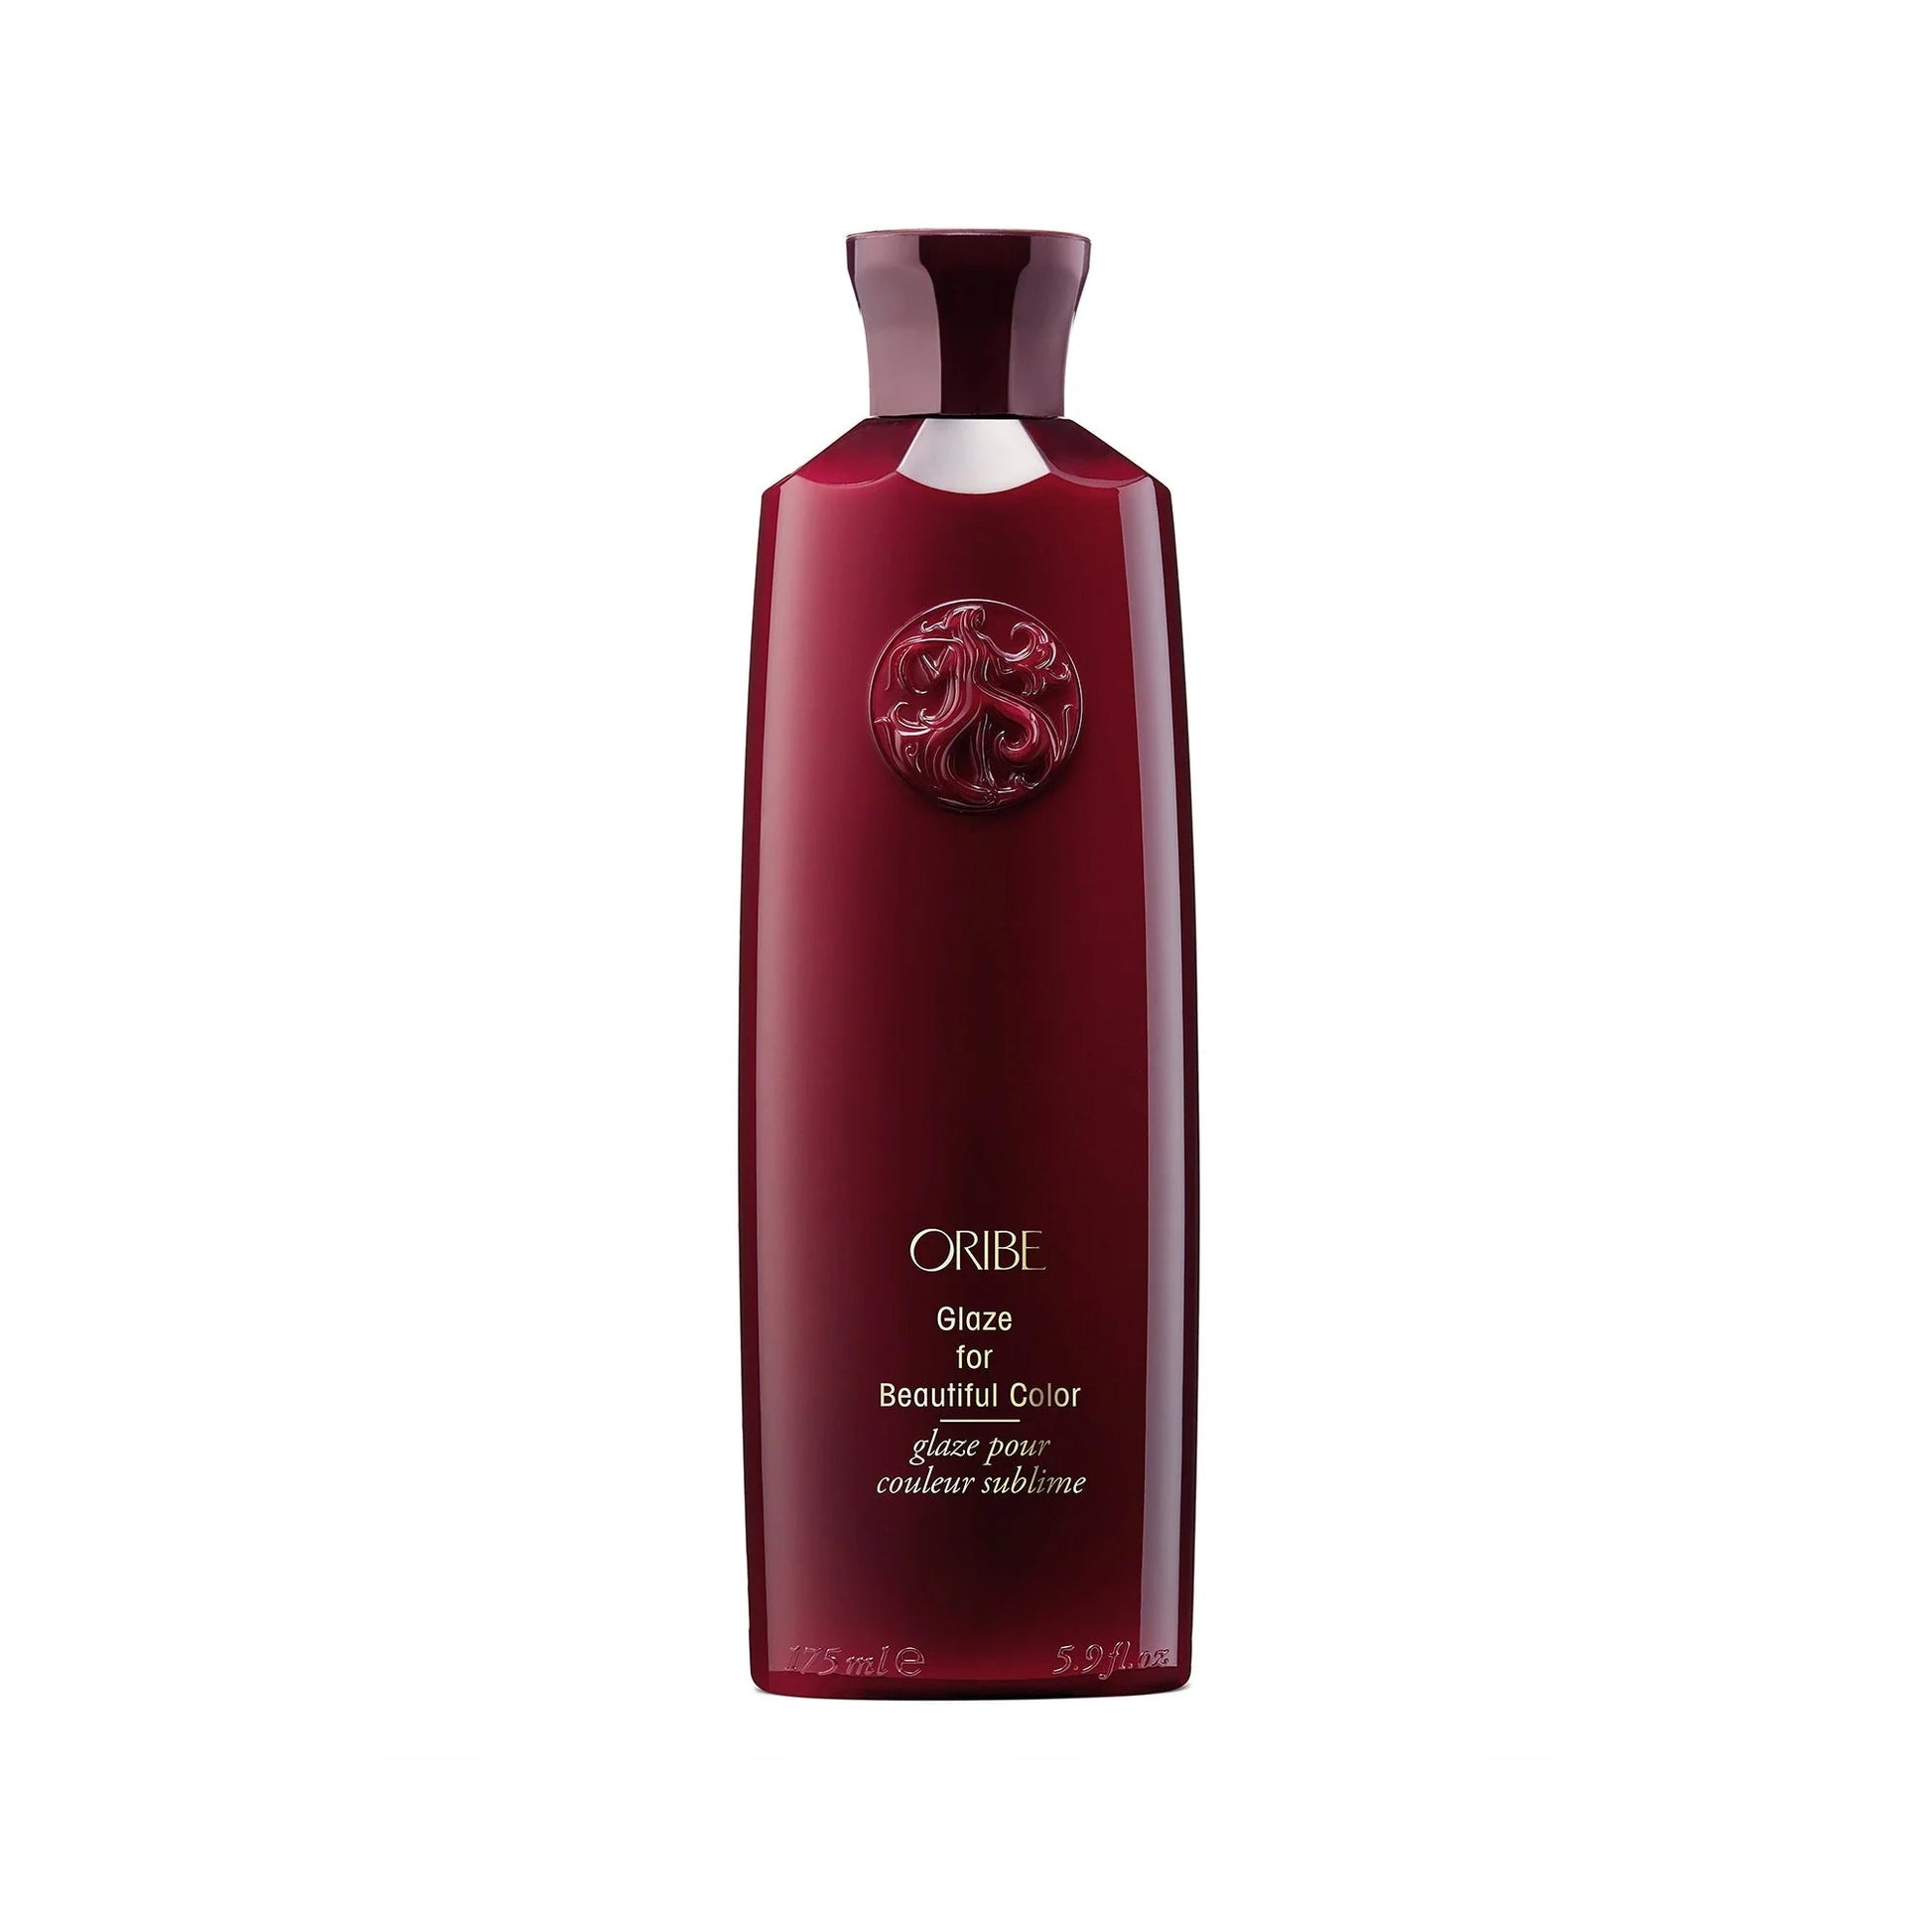 Oribe Glaze for Beautiful Color - shelley and co